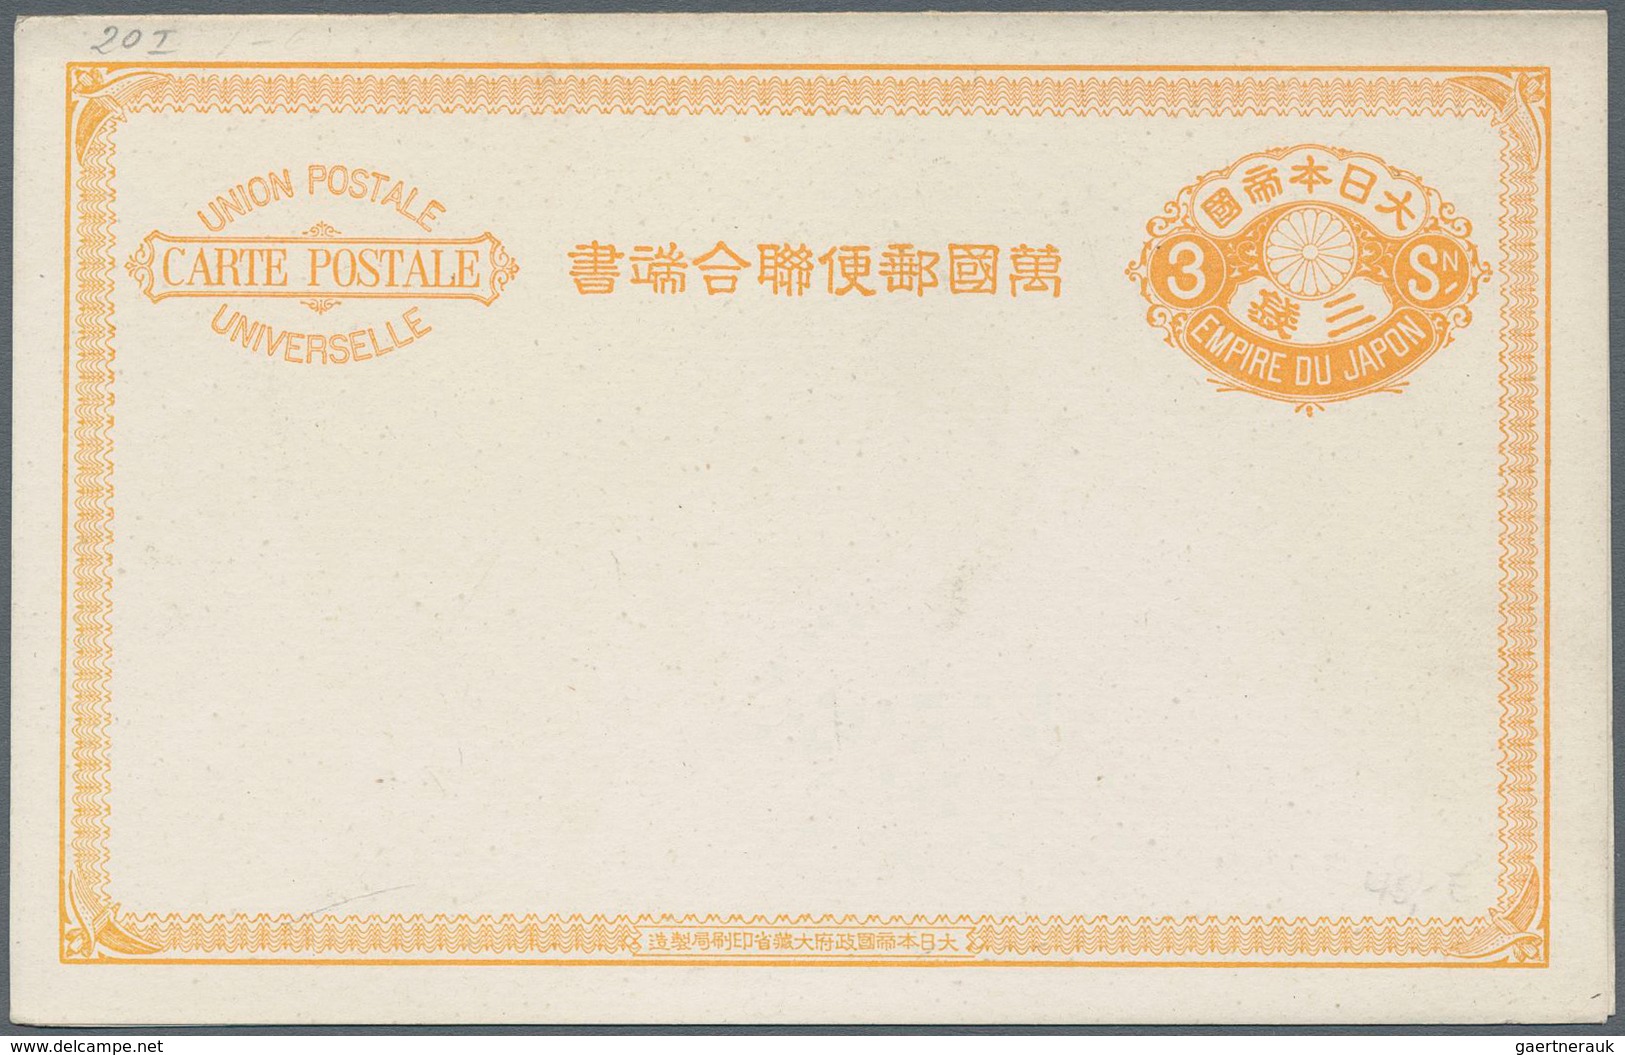 Japan - Ganzsachen: 1874/1922, mint and used old-time collection. Inc. uprates, used foreign, severa